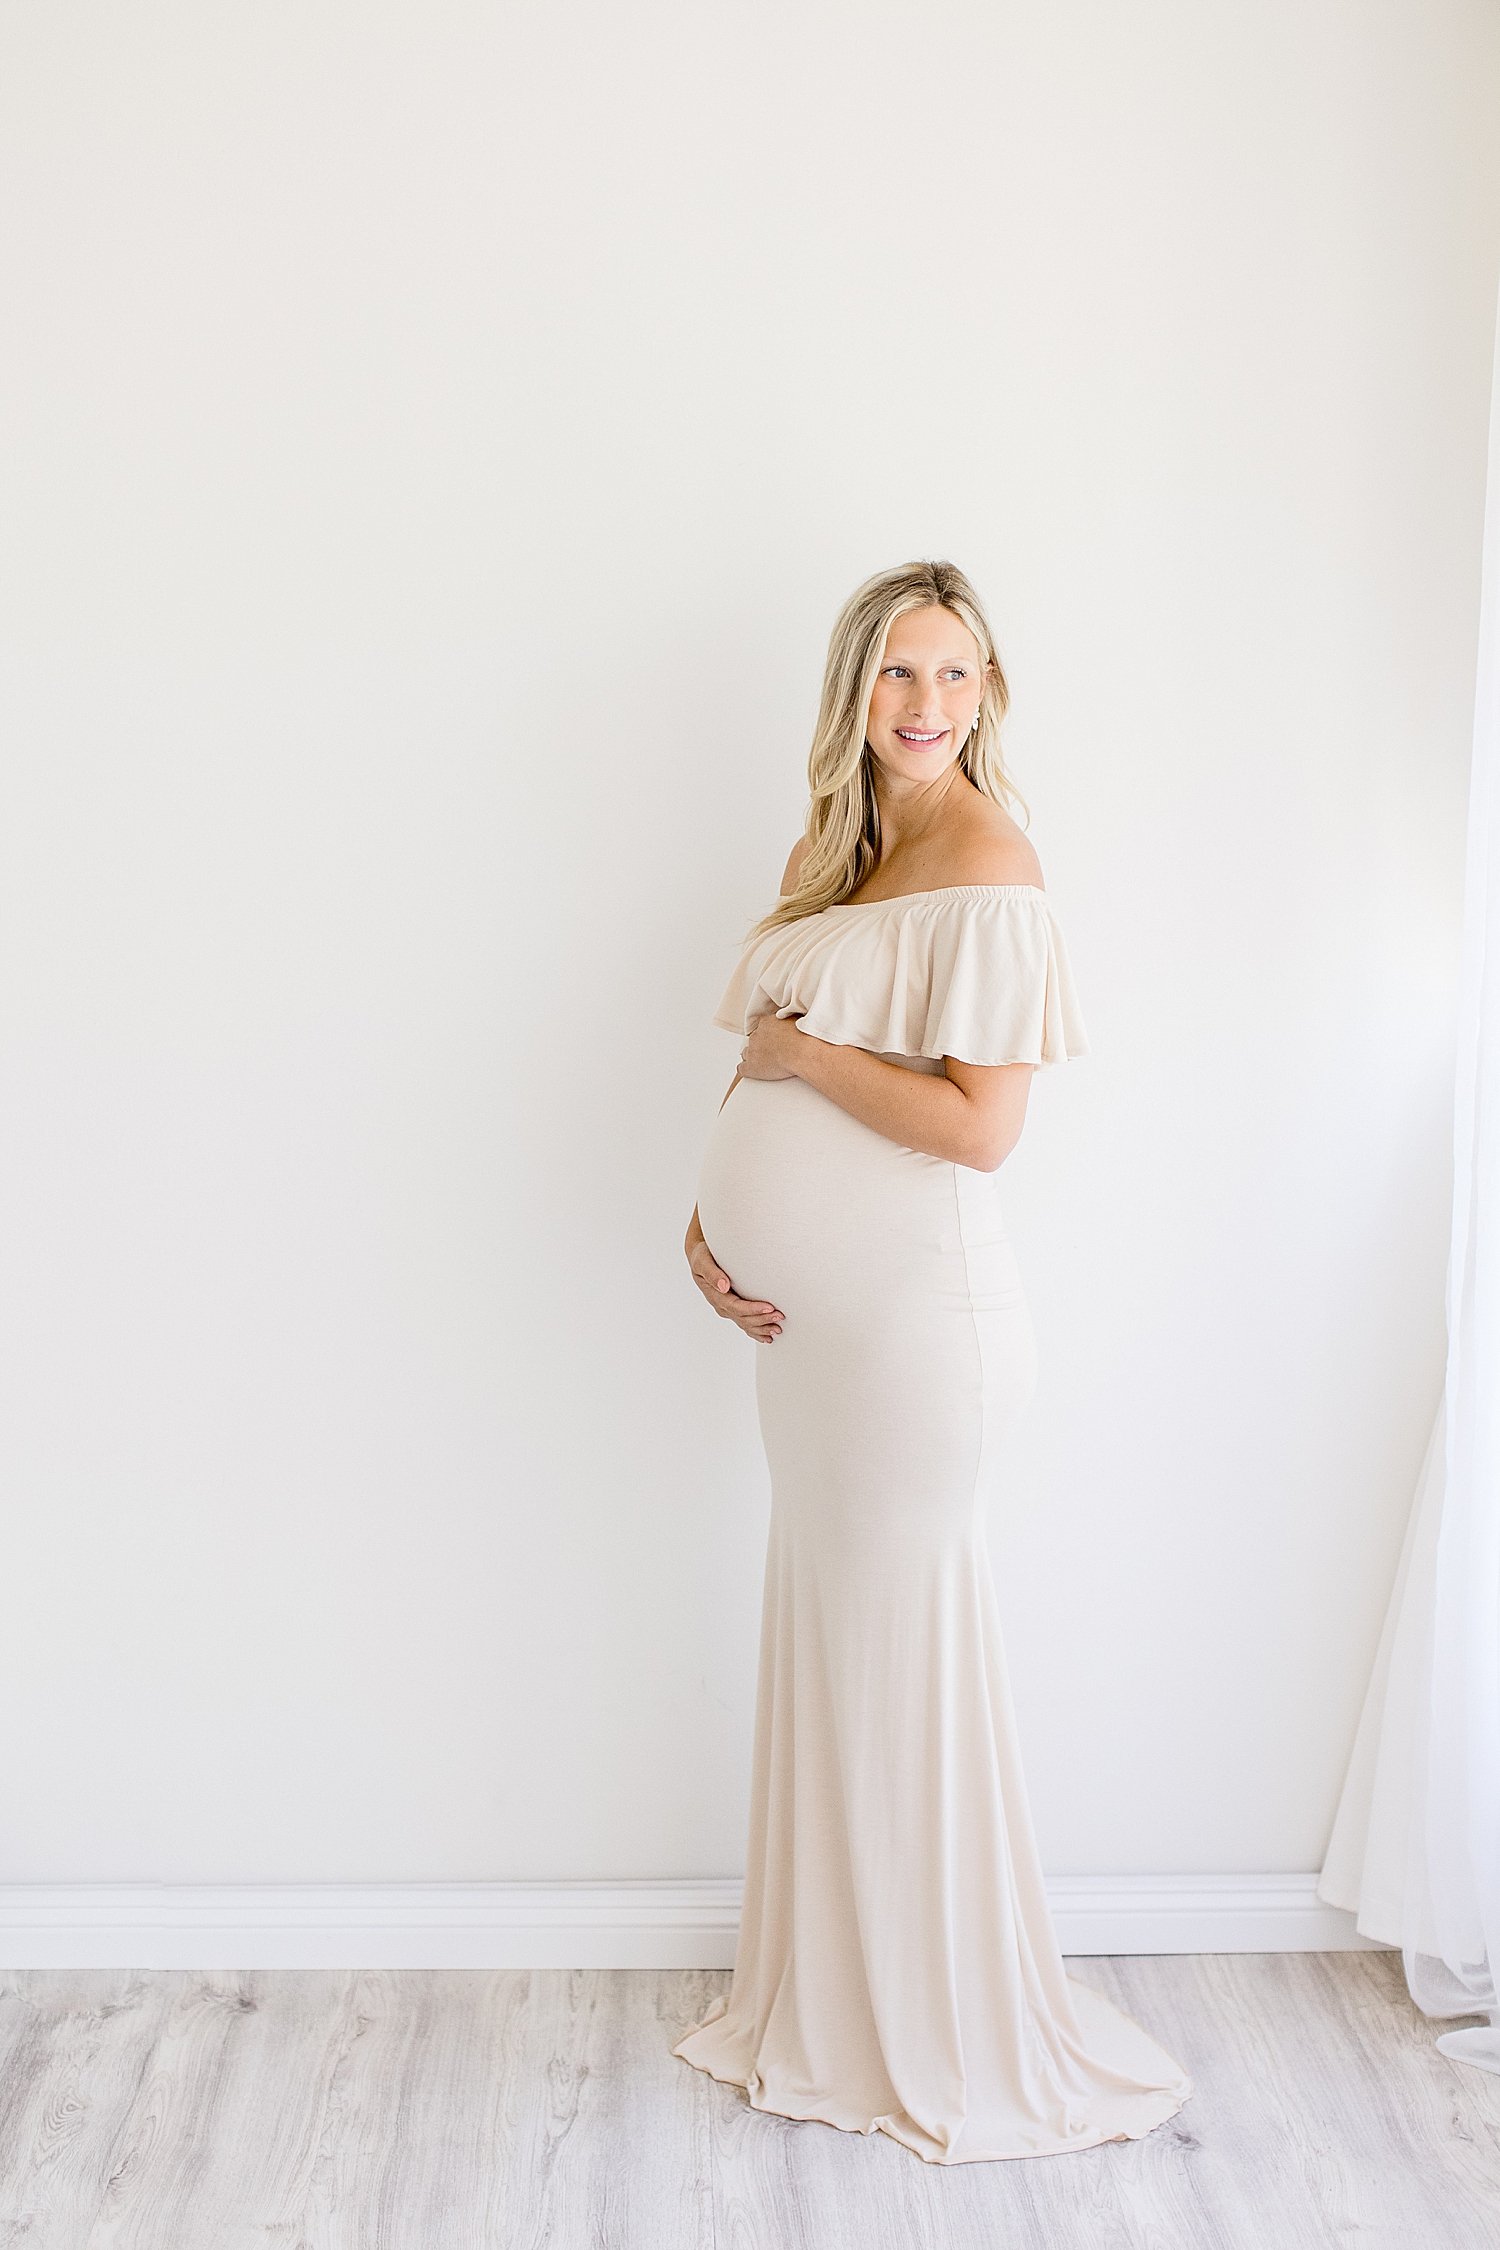 Mom in long, beautiful dress for maternity photoshoot | Ambre Williams Photography